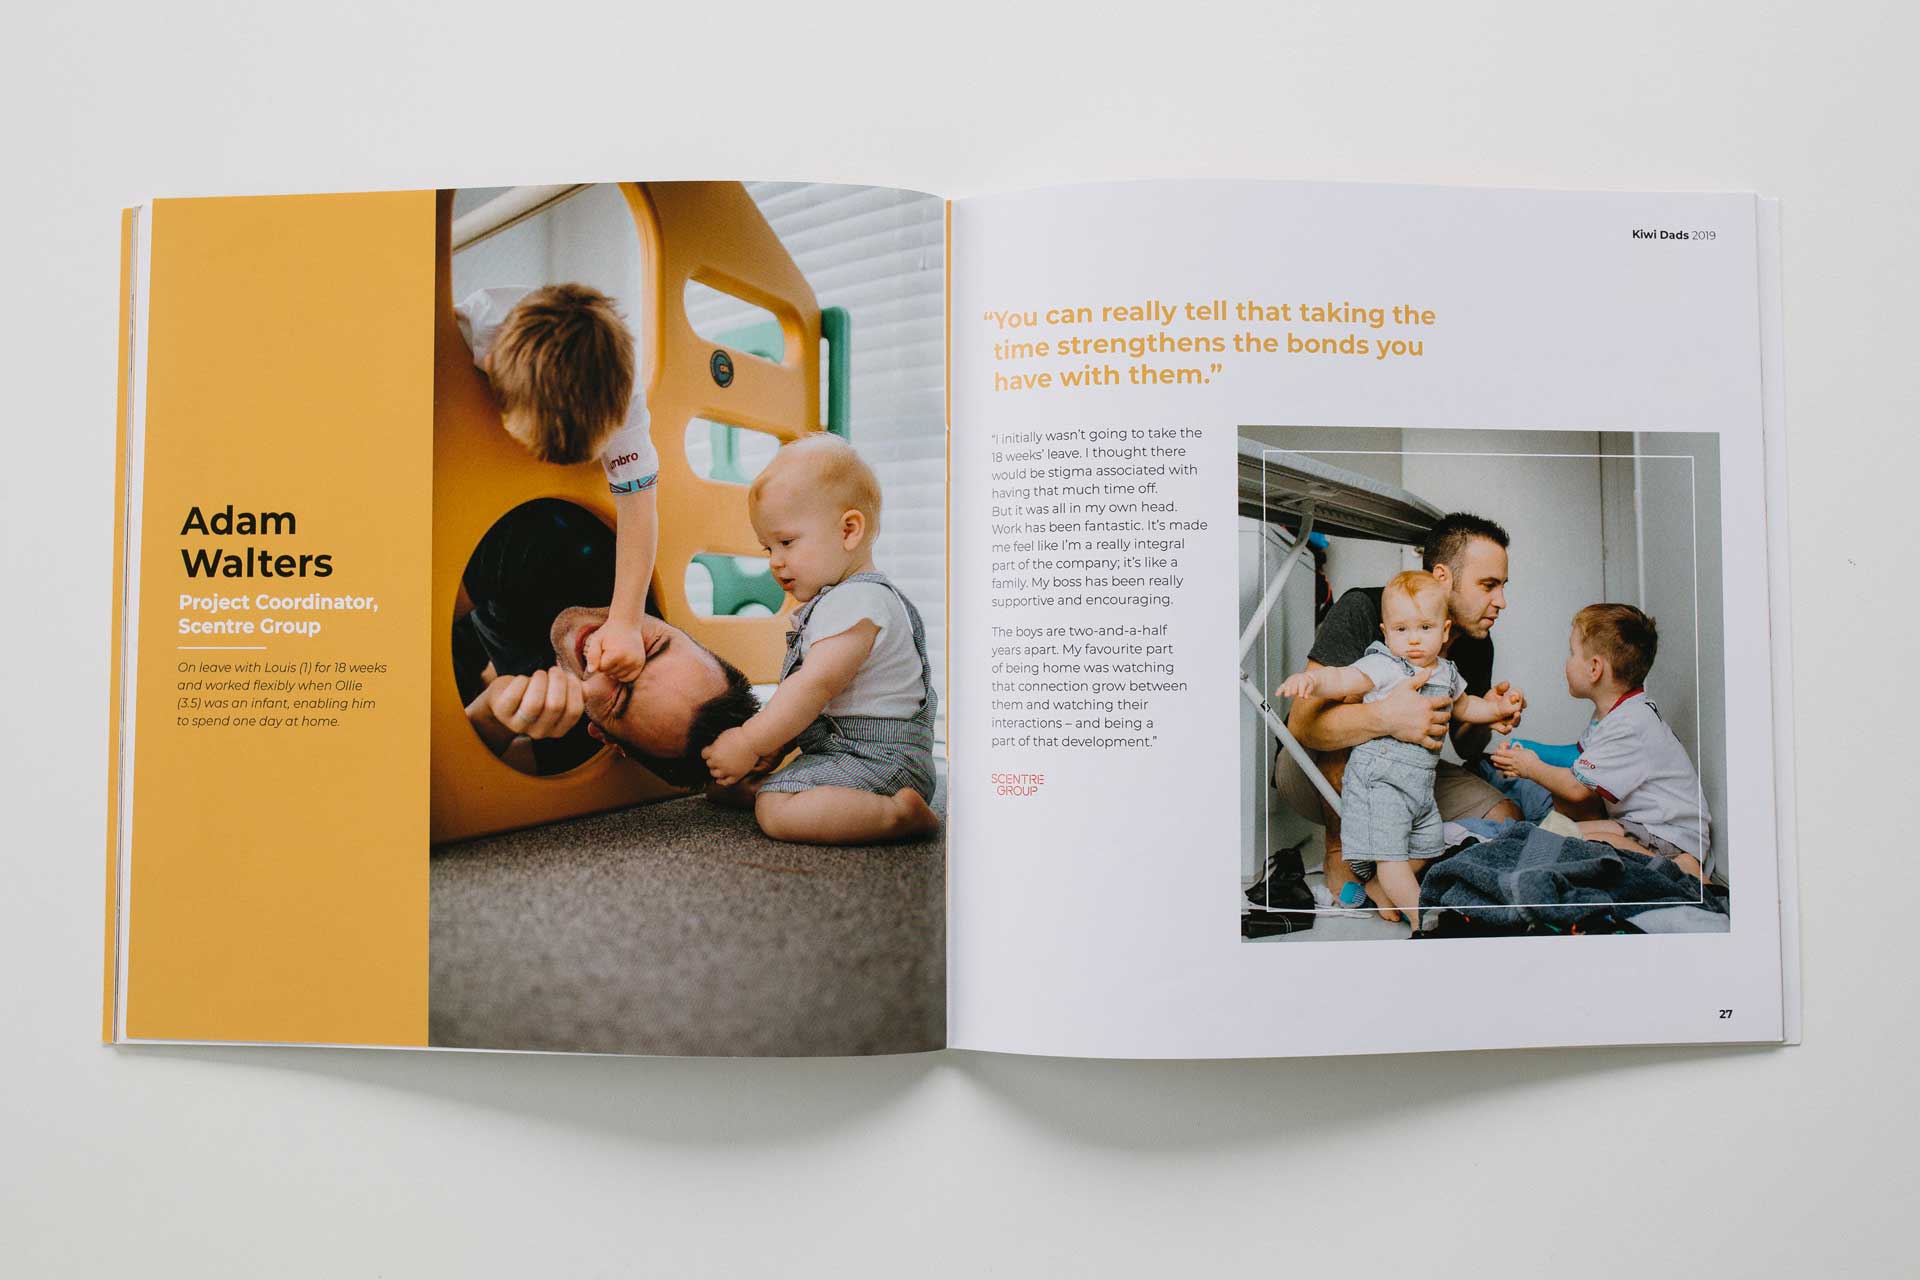 kiwi dads booklet photo of adam walters of scentre group playing with children photos by sarah weber photography